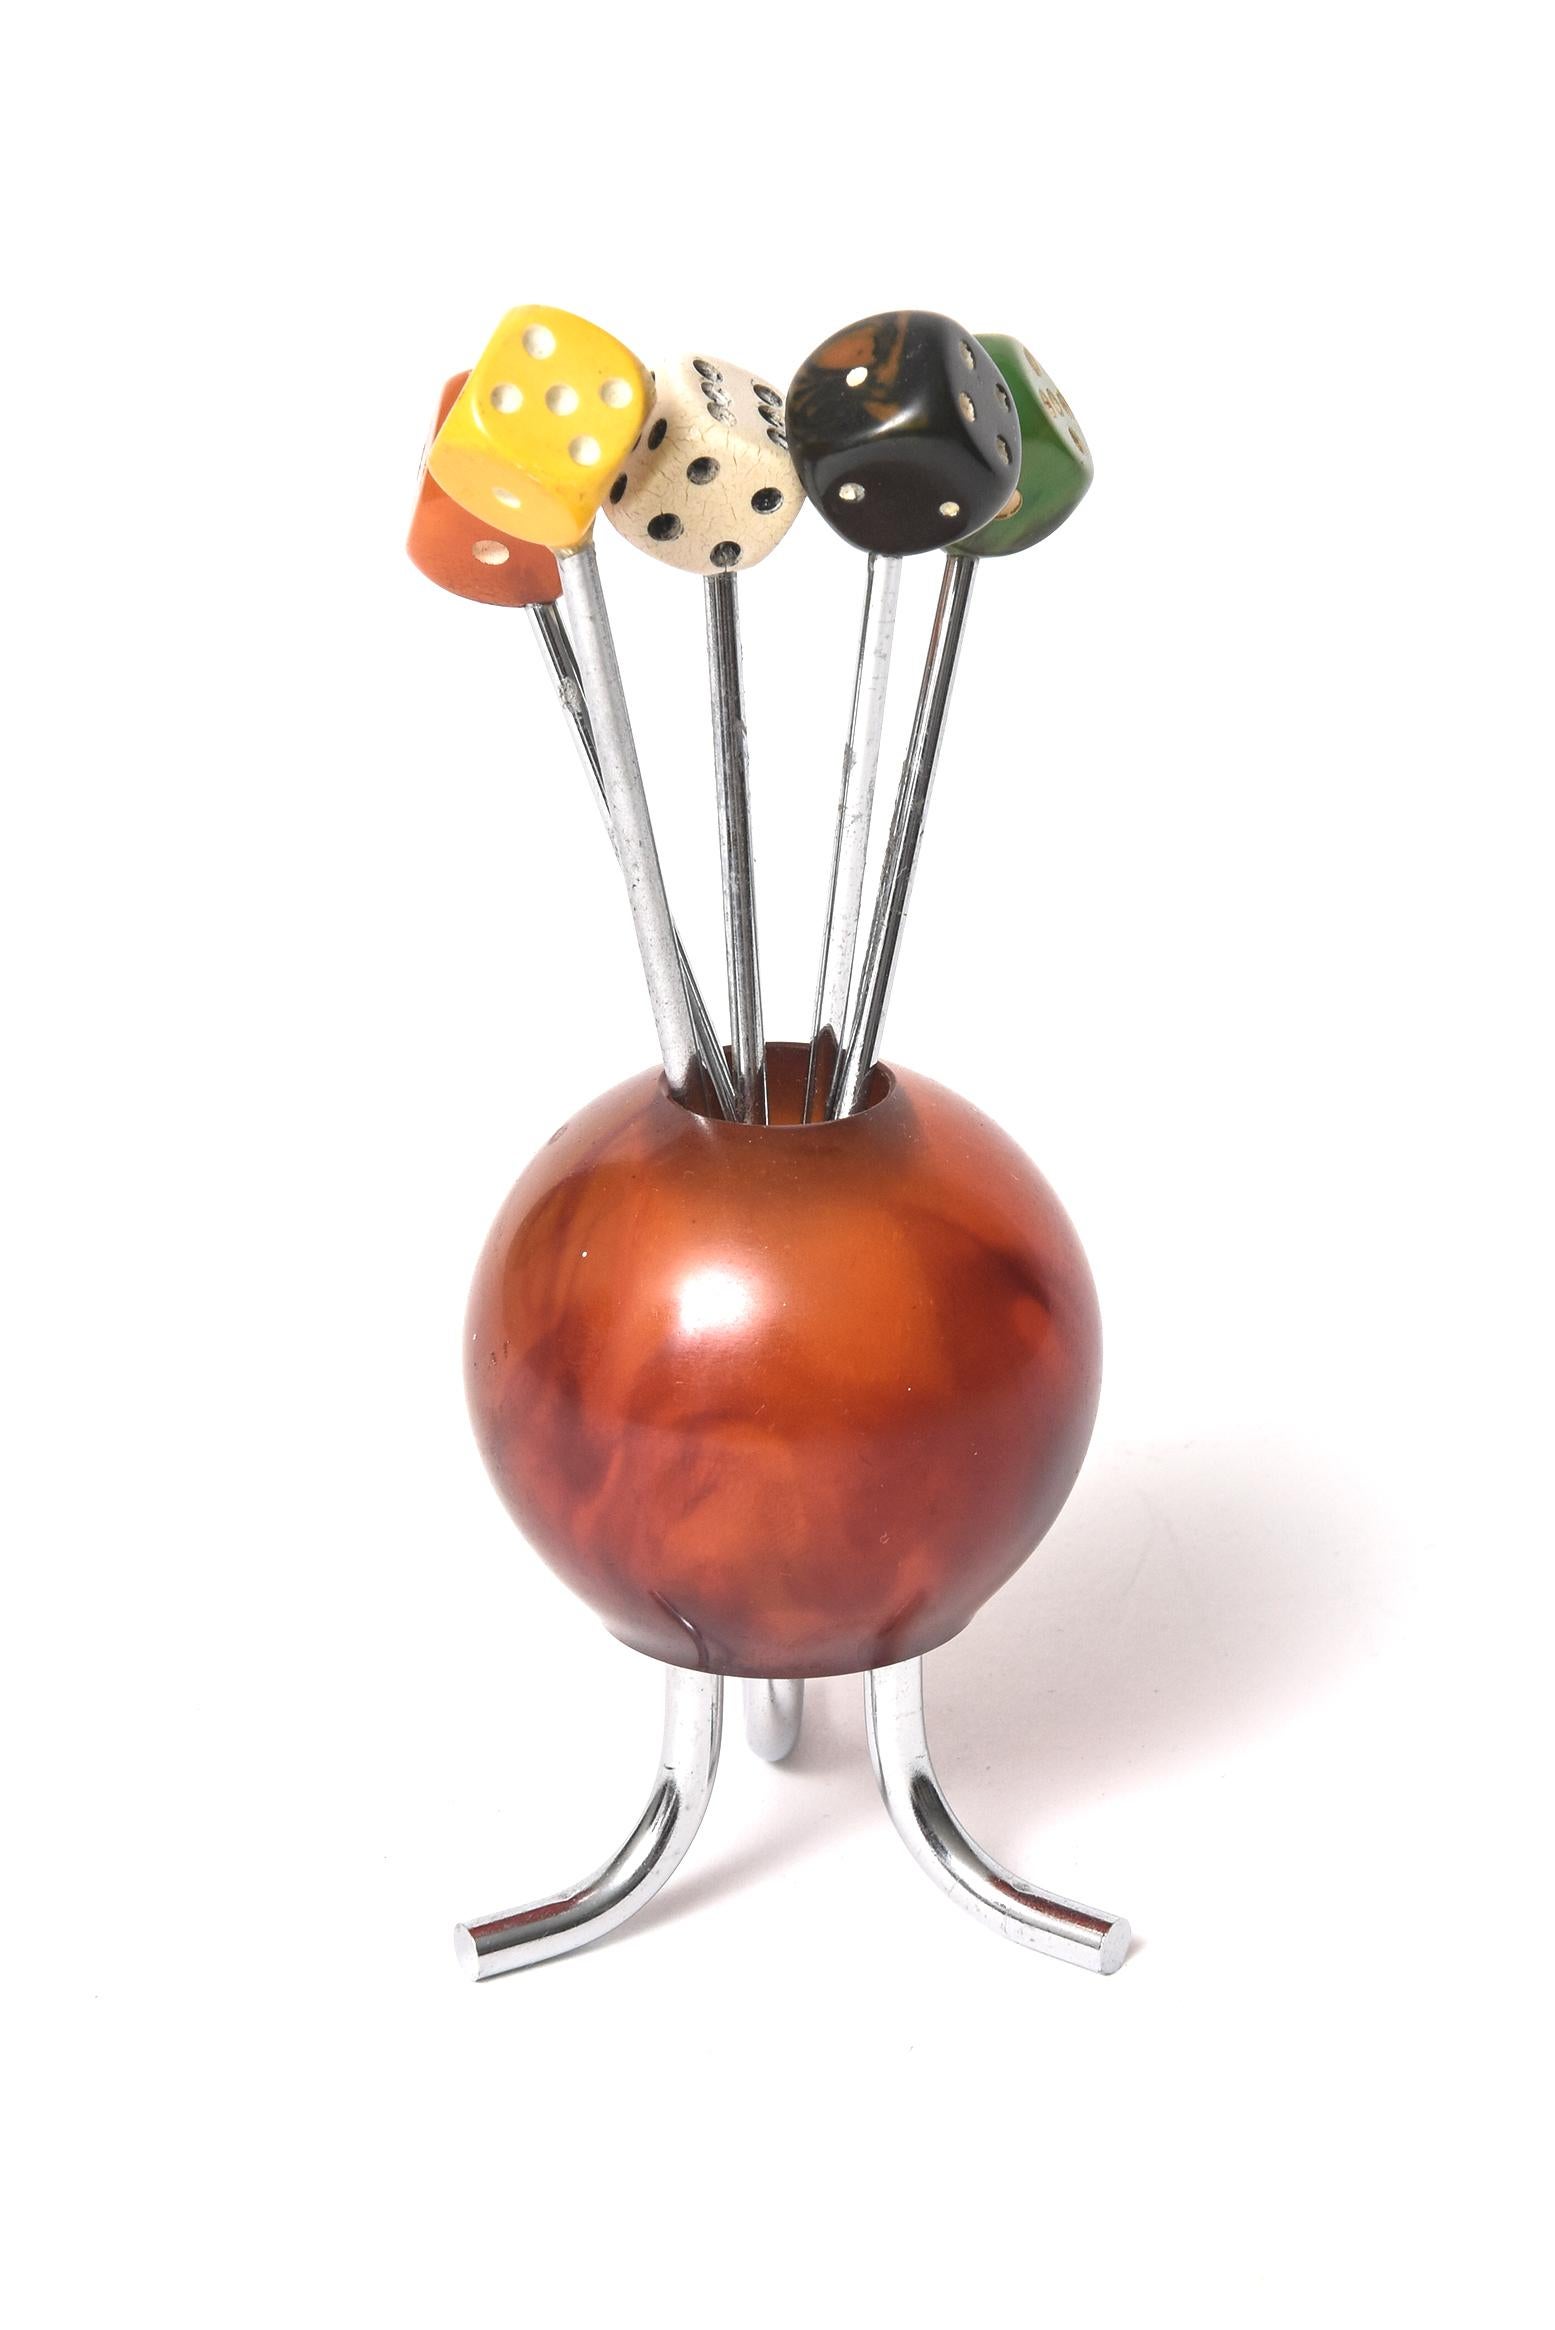 A French Art Deco cocktail pick set featuring an amber colored bakelite ball on 3 chrome legs holding 5 dice cocktail fork picks. The dice are wood and bakelite with a chrome fork pick stick These cocktail pick holders (